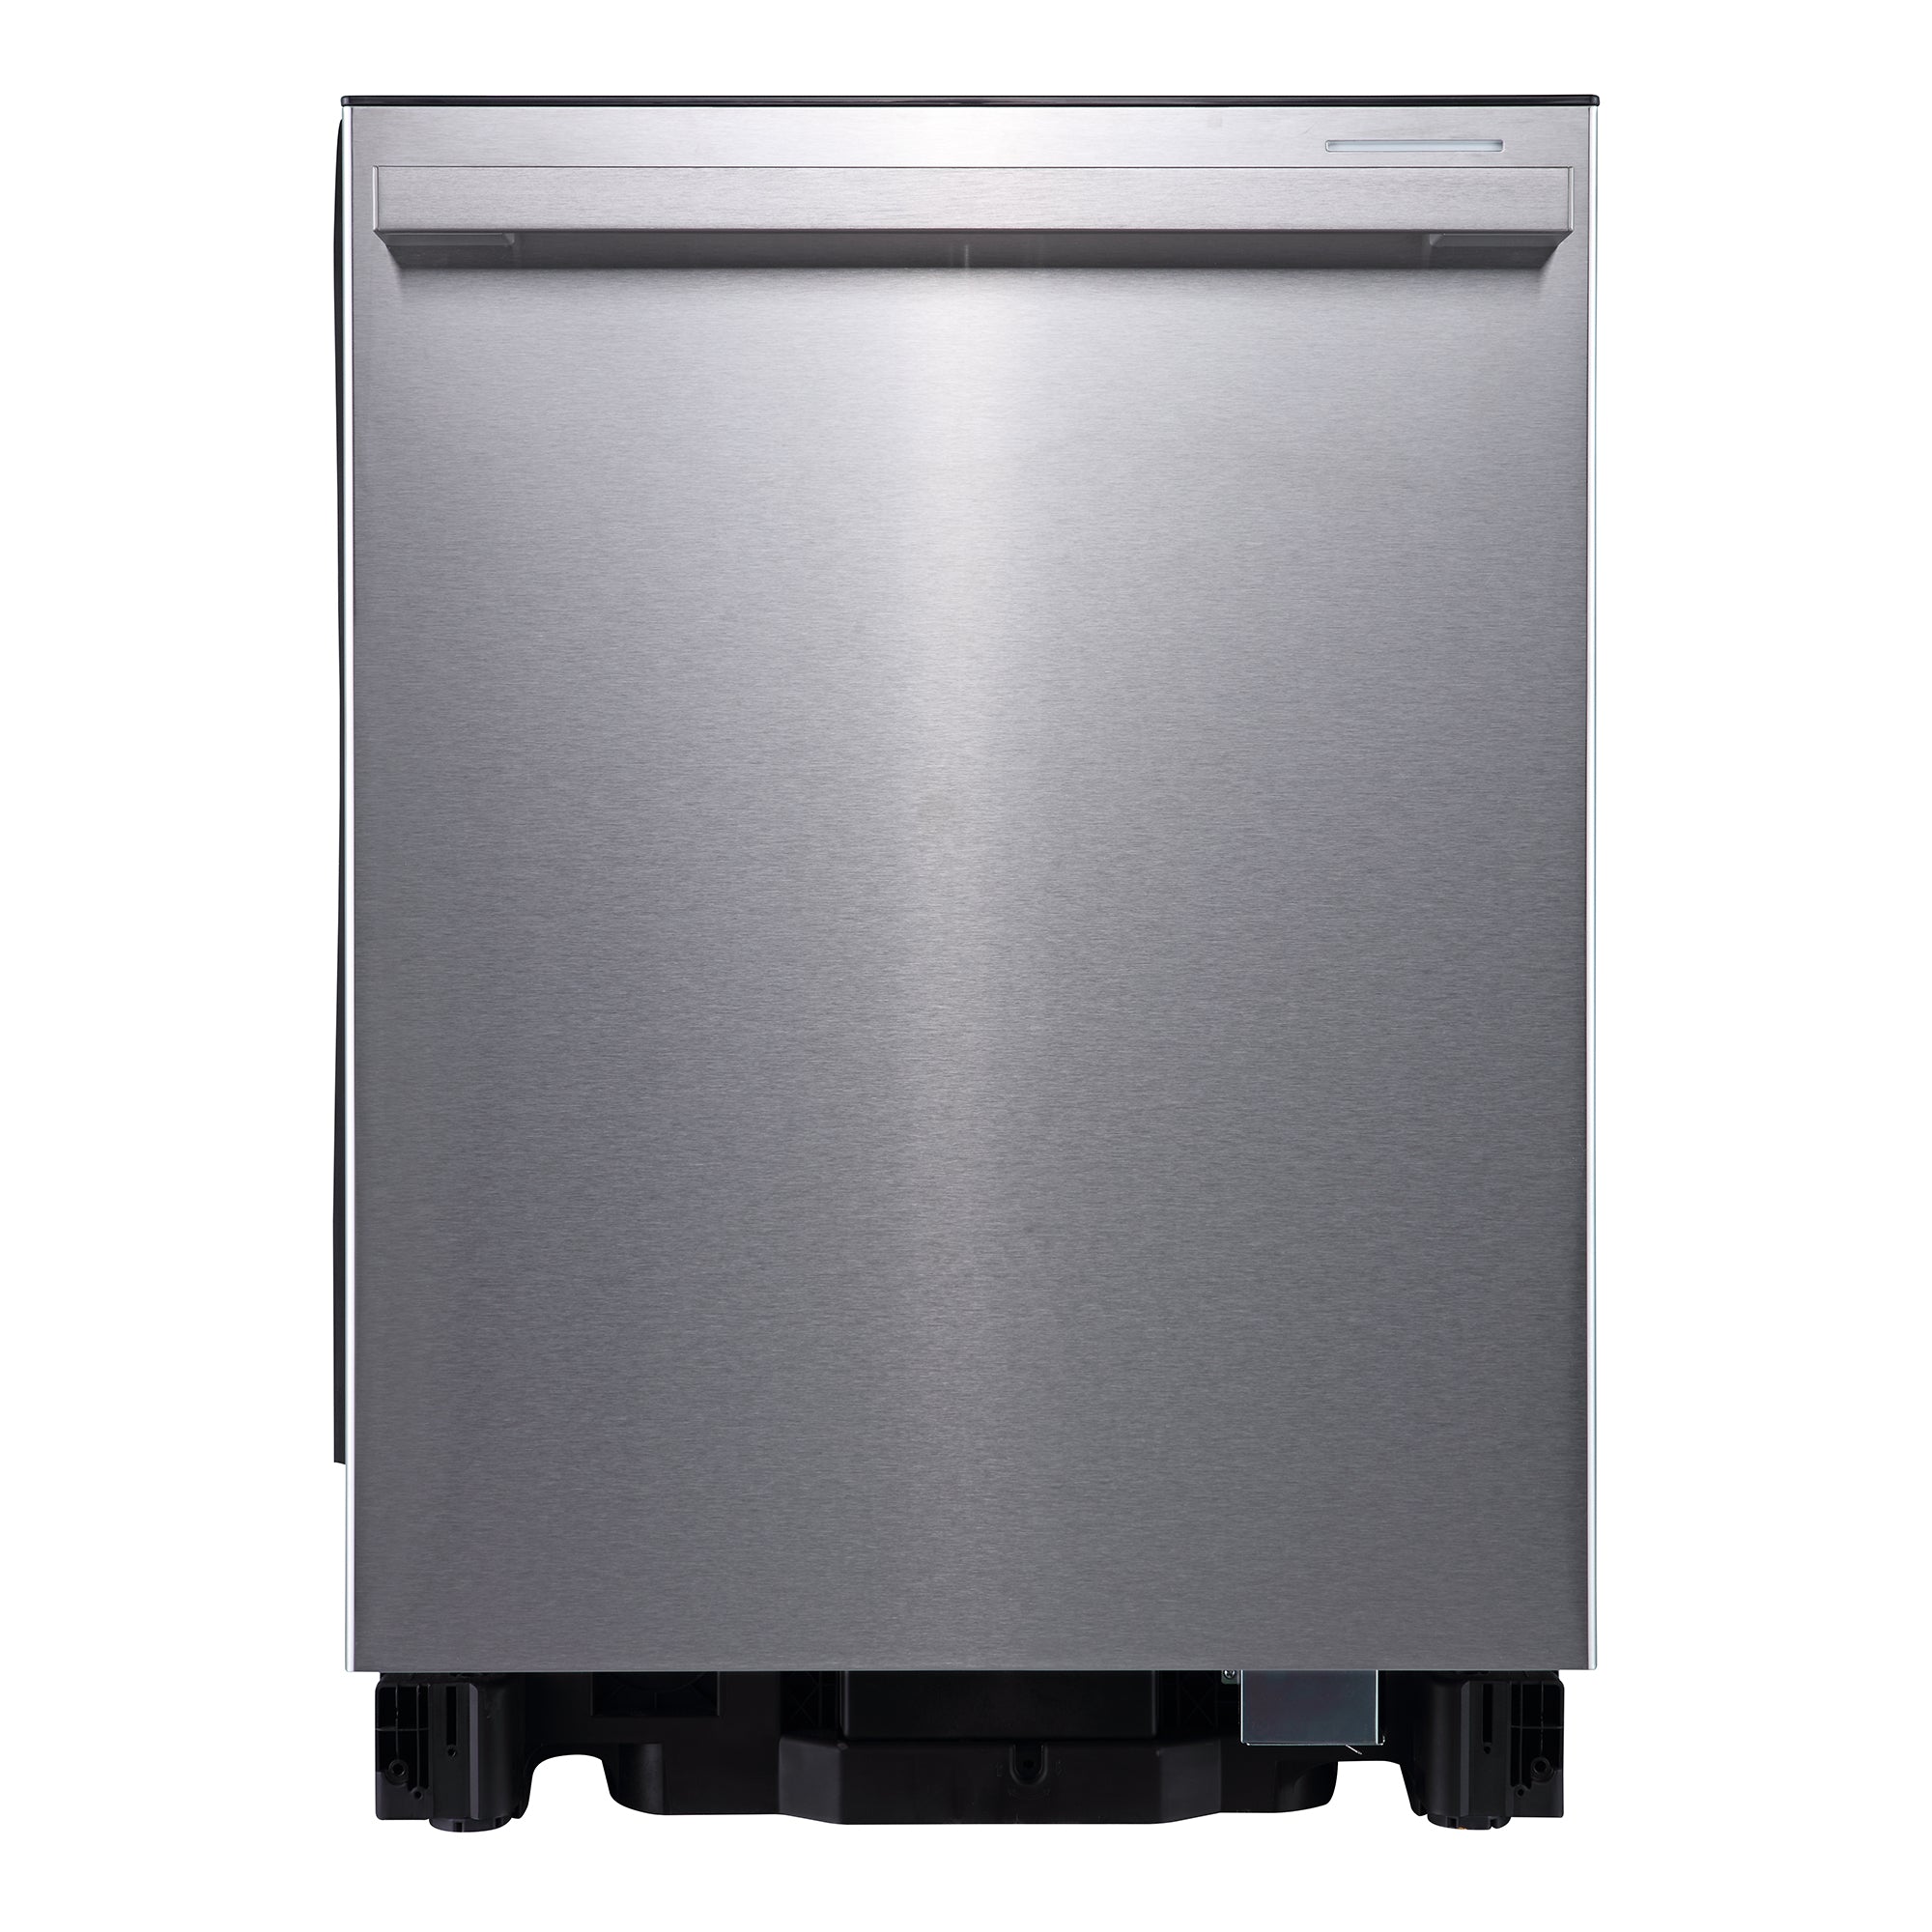 Hisense - 47 dBA Built In Dishwasher in Stainless - HDW63314SS